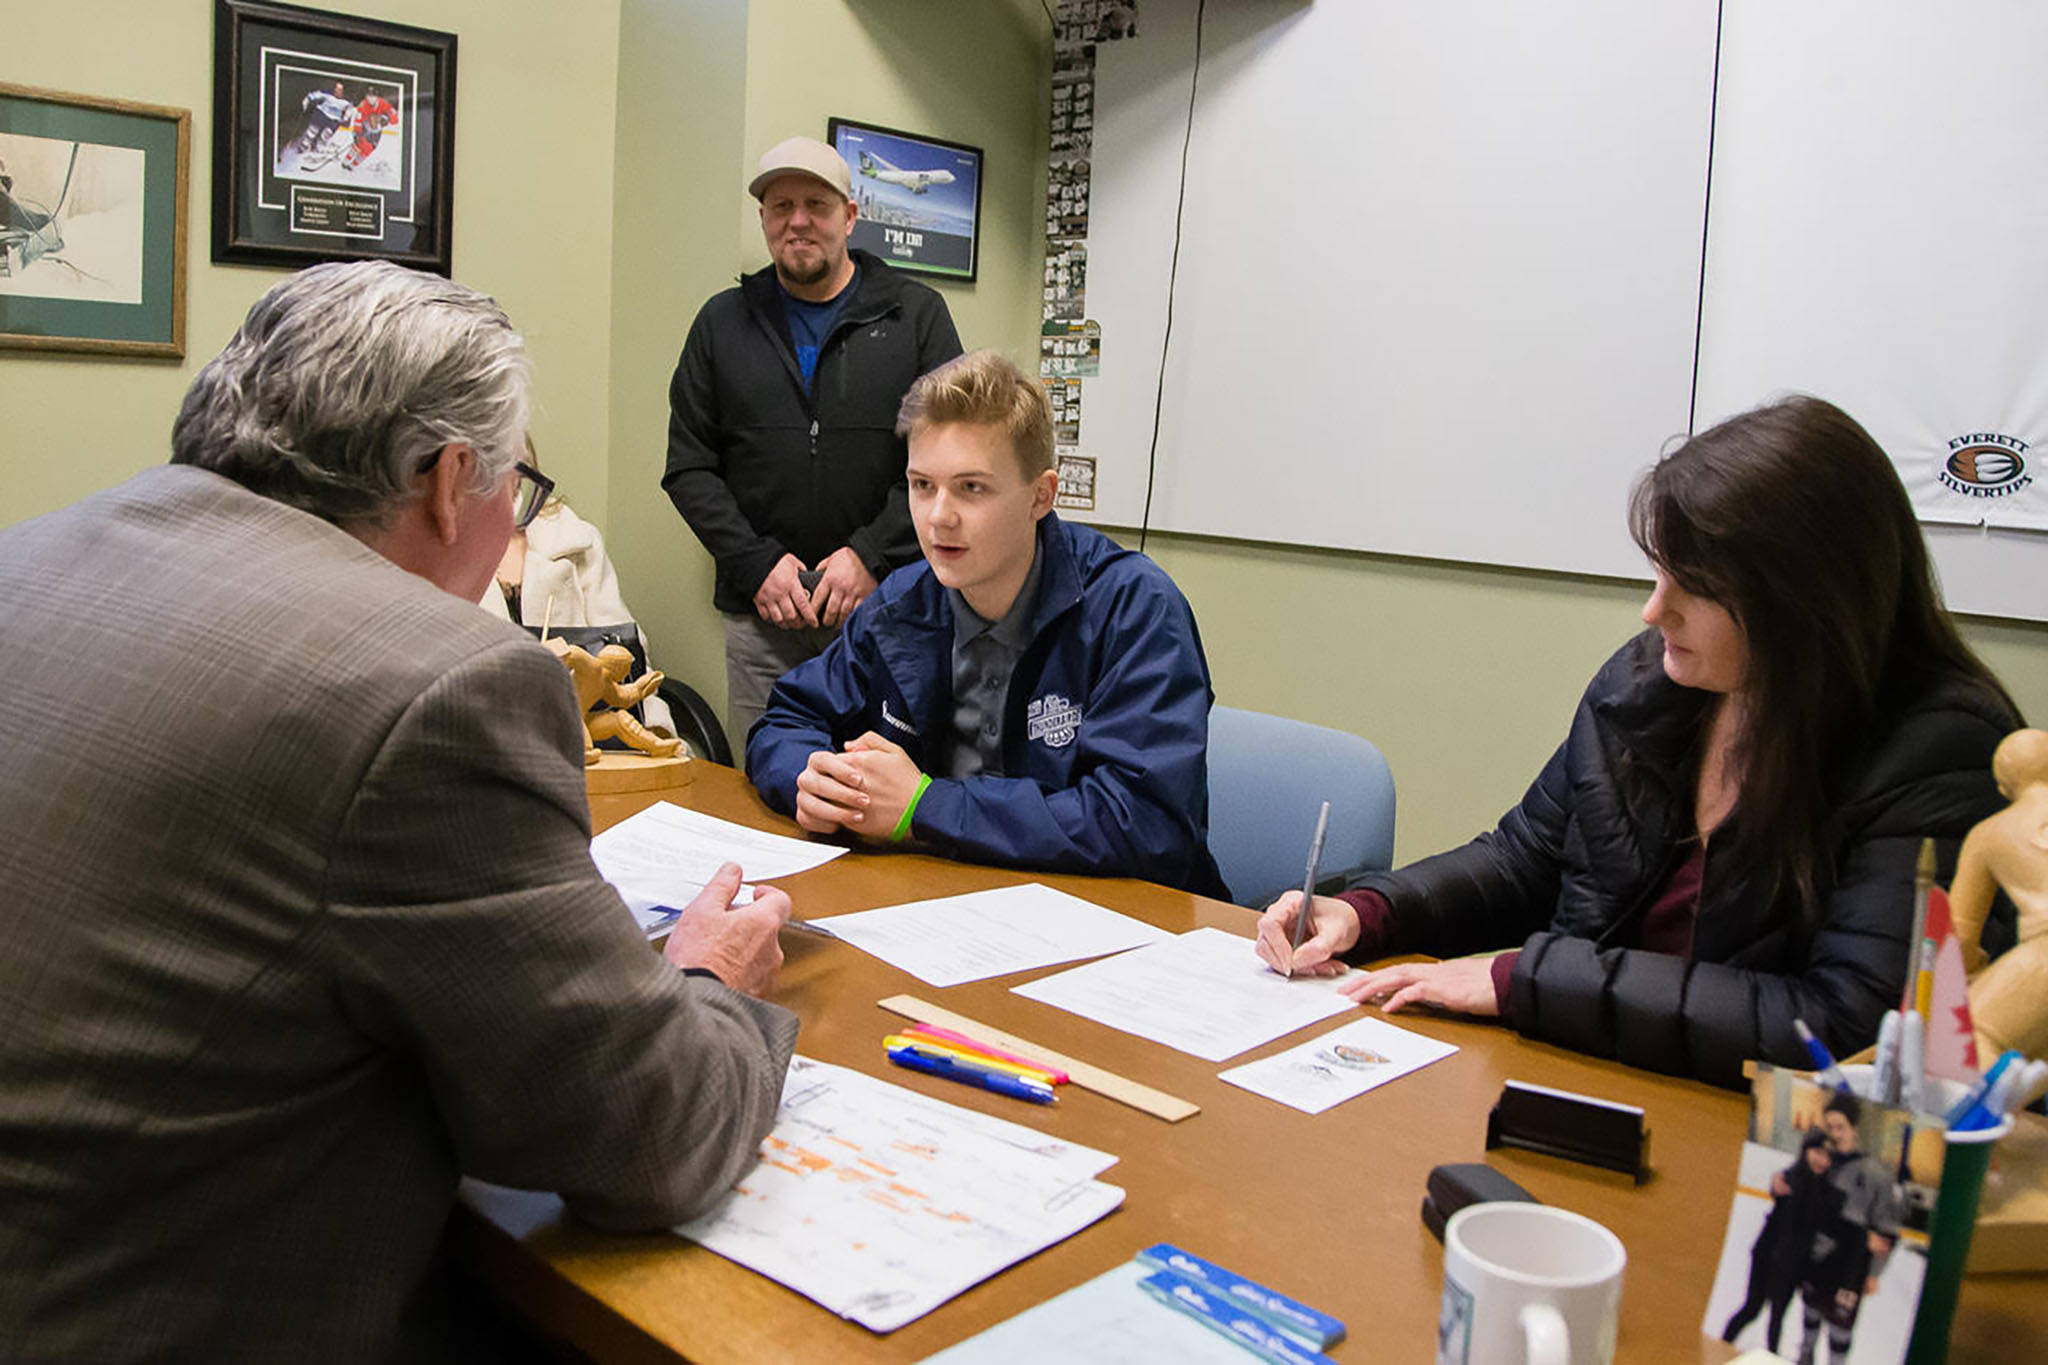 Jacob Wright (center), who signed with the Silvertips on Tuesday, chats with Everett general manager Garry Davidson (left) in his office. (Credit: Chris Mast/Everett Silvertips)